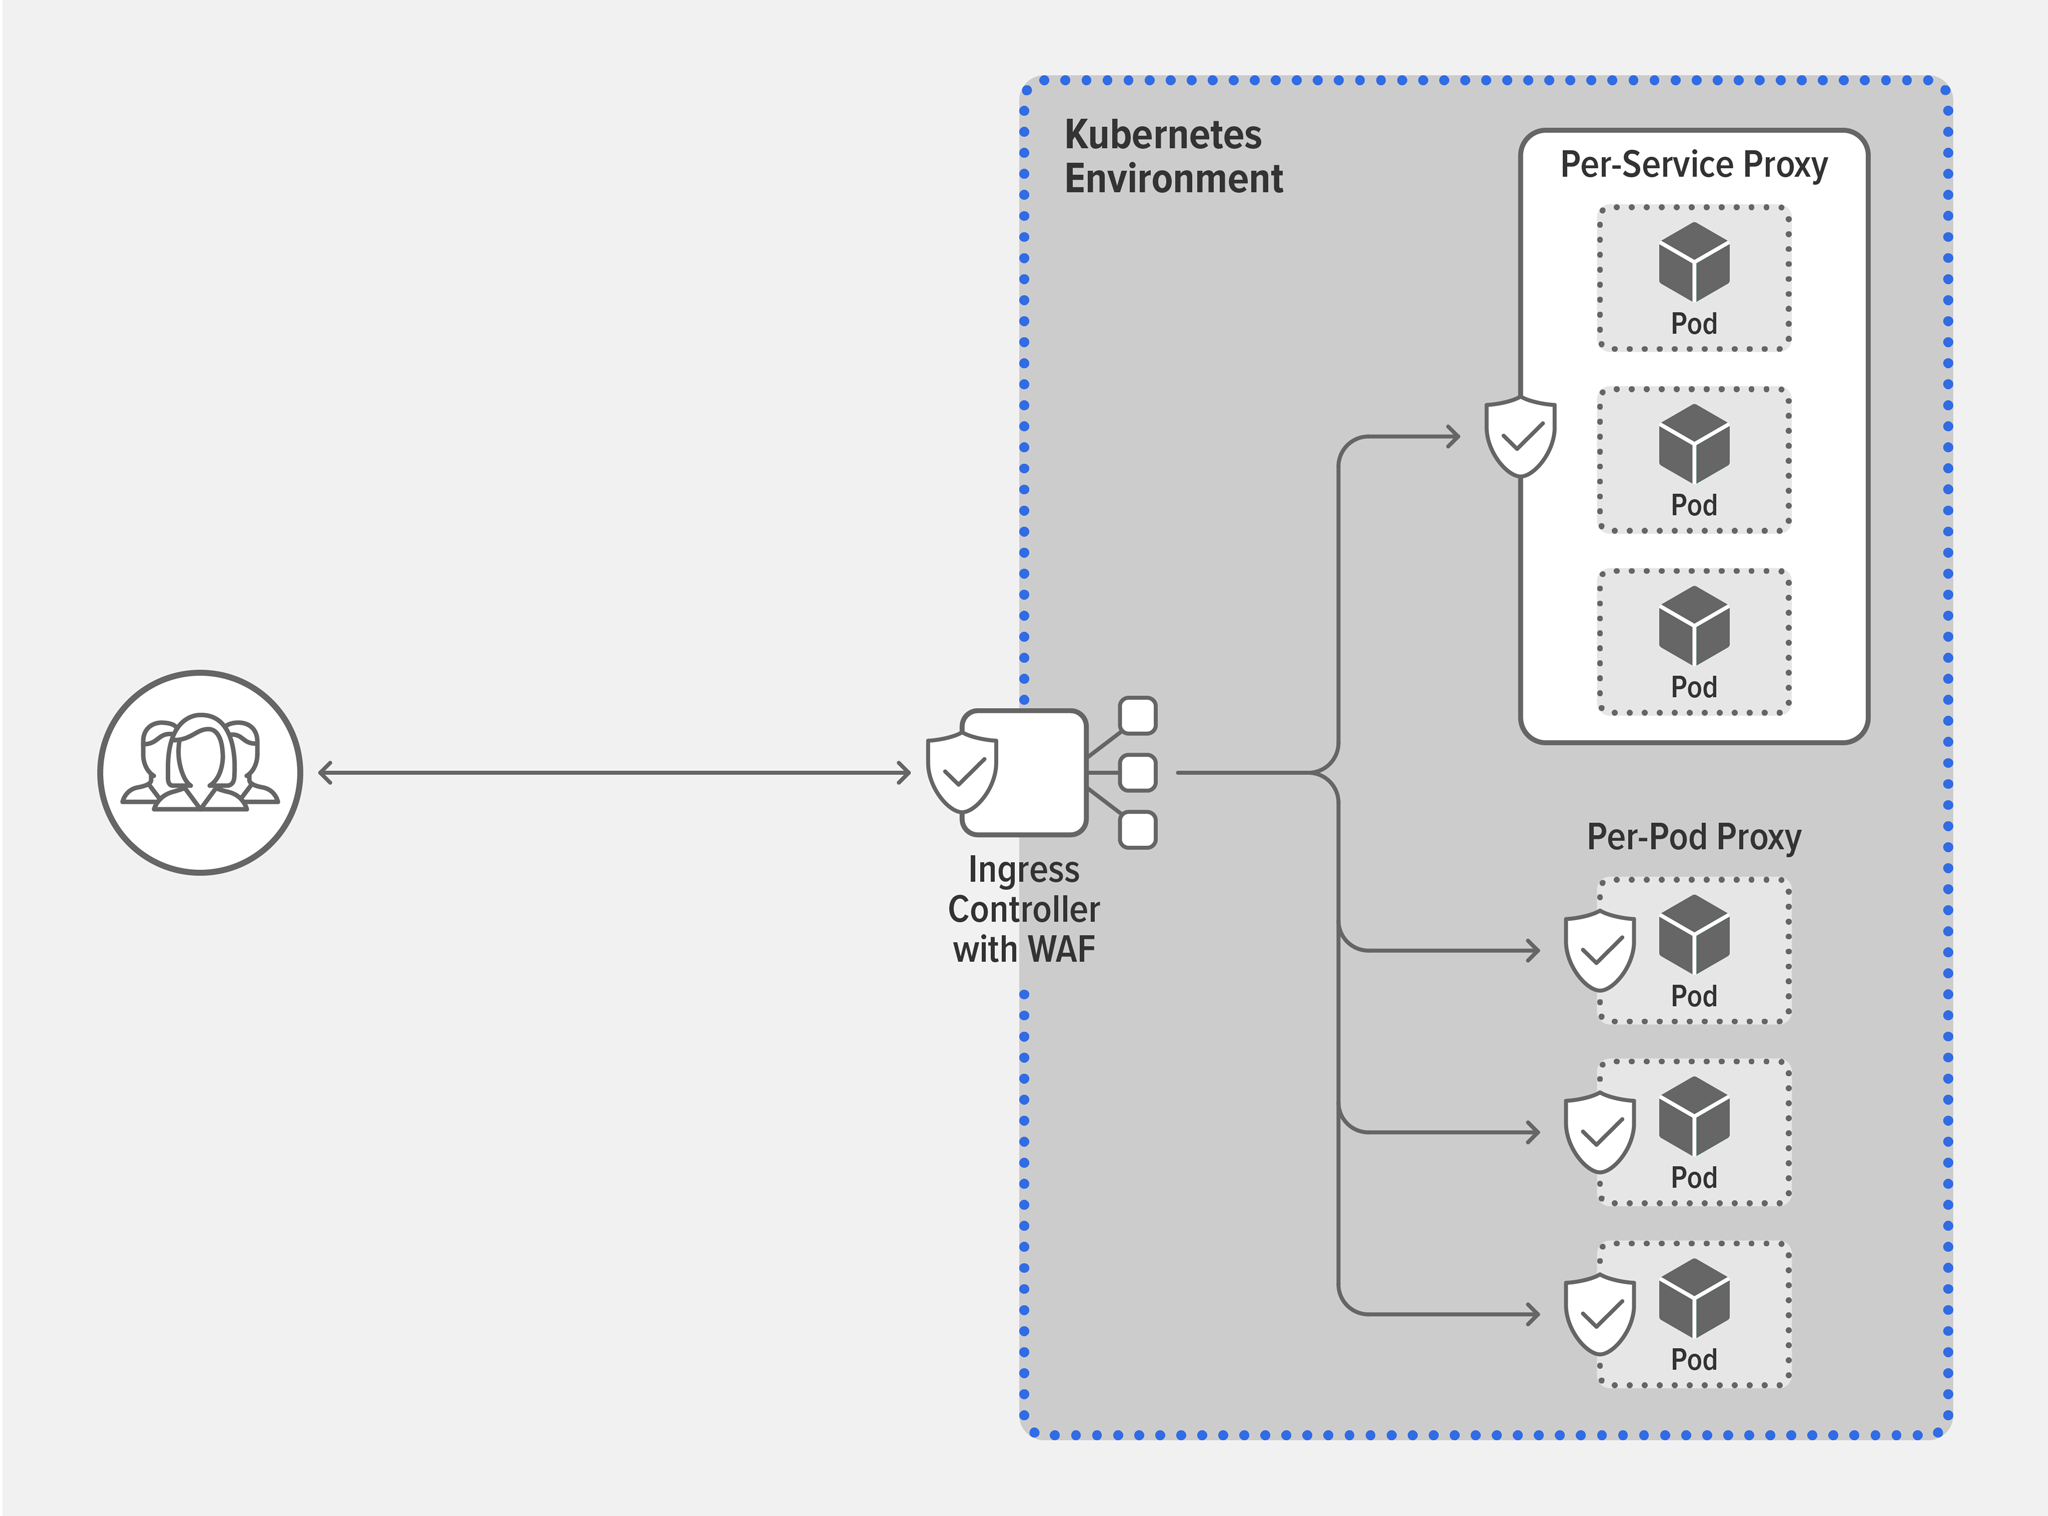 Topology diagram of Kubernetes environment with a WAF deployed alongside a generic Ingress controller